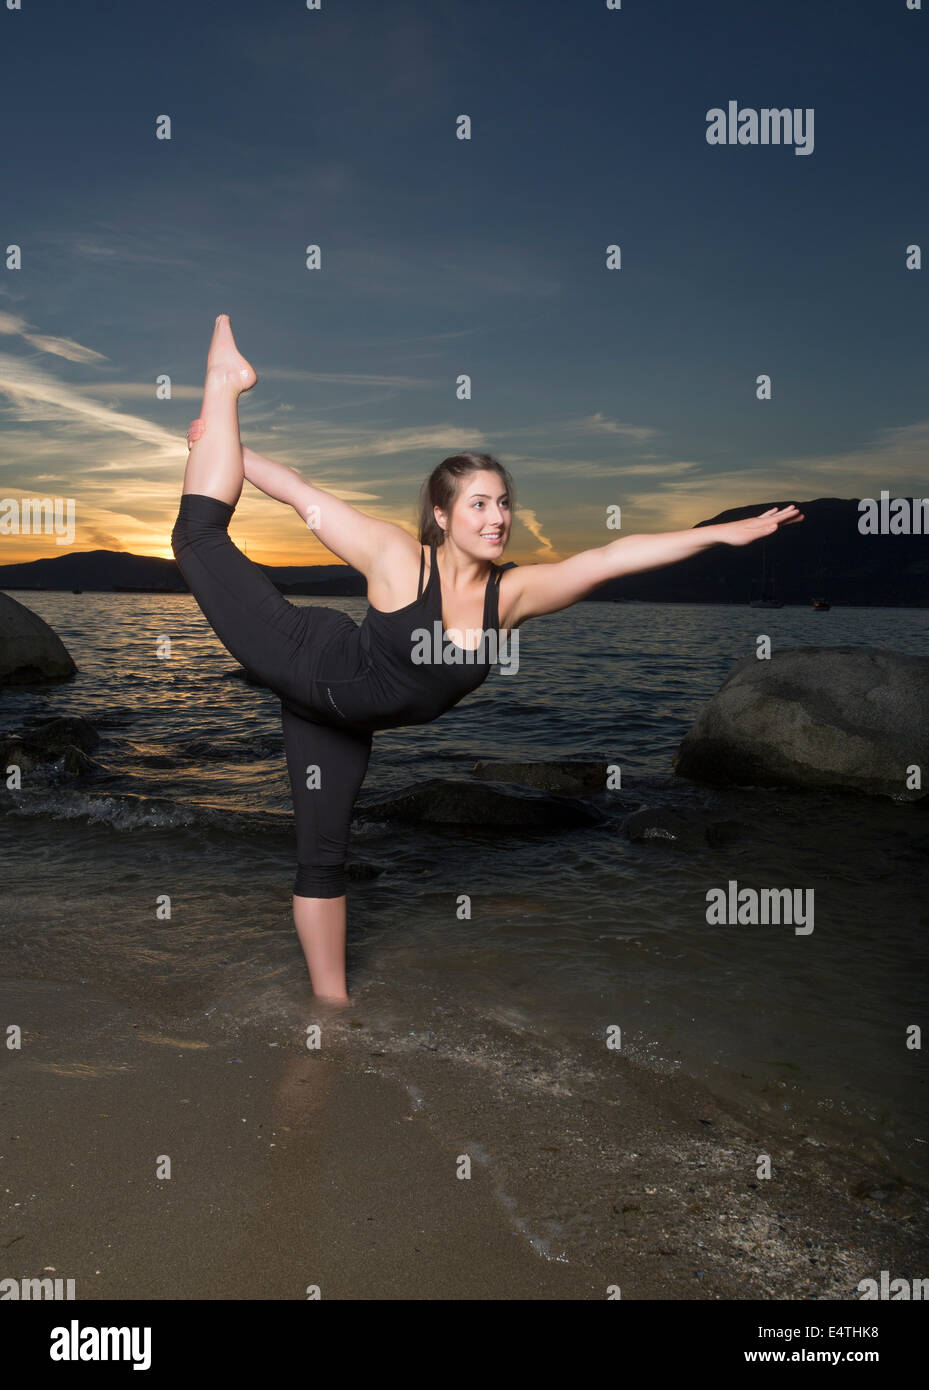 An attractive young woman in black spandex strikes a yoga pose in the waves of a beach at sunset. Stock Photo